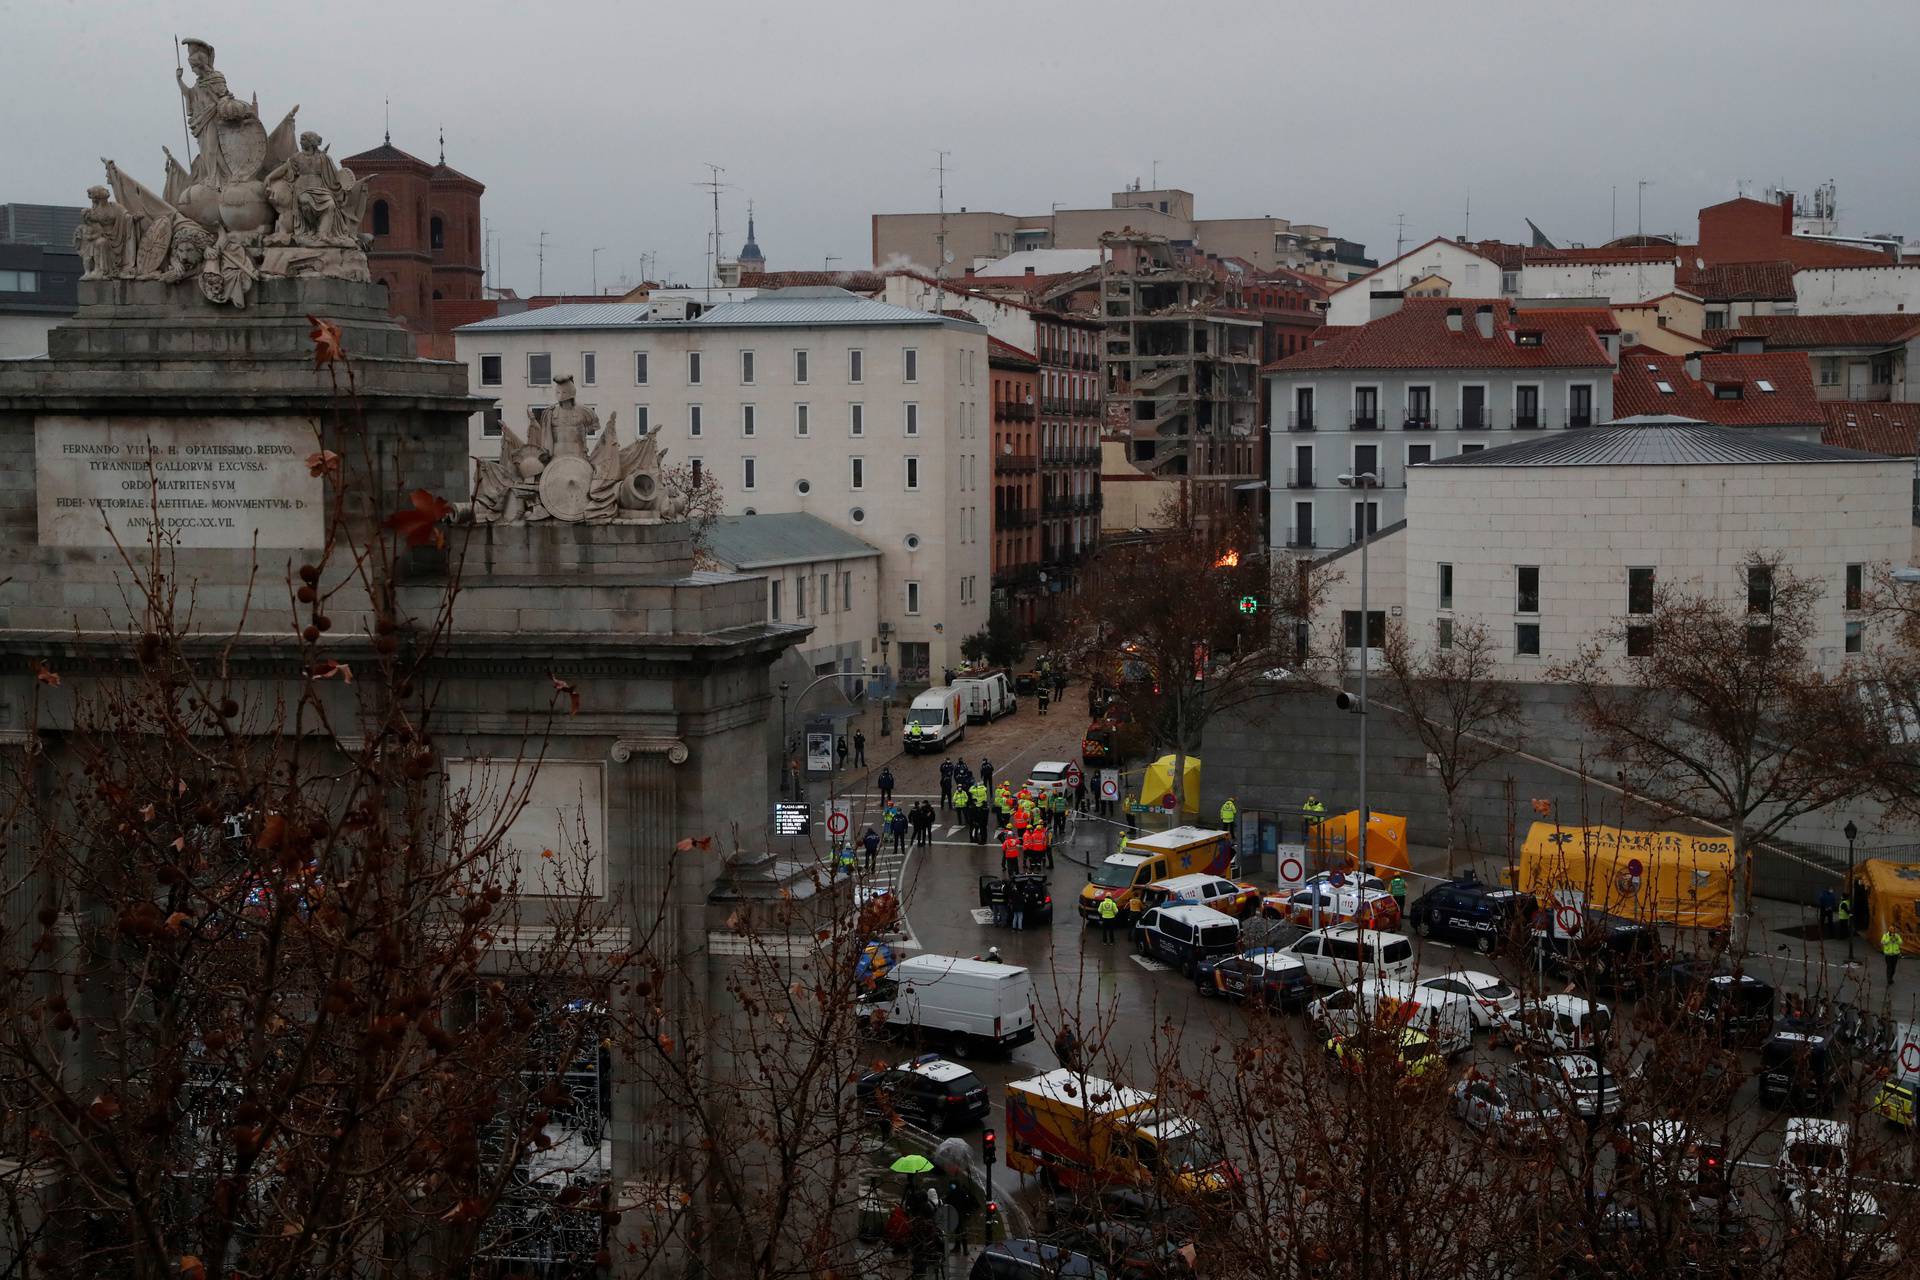 Explosion in Madrid downtown